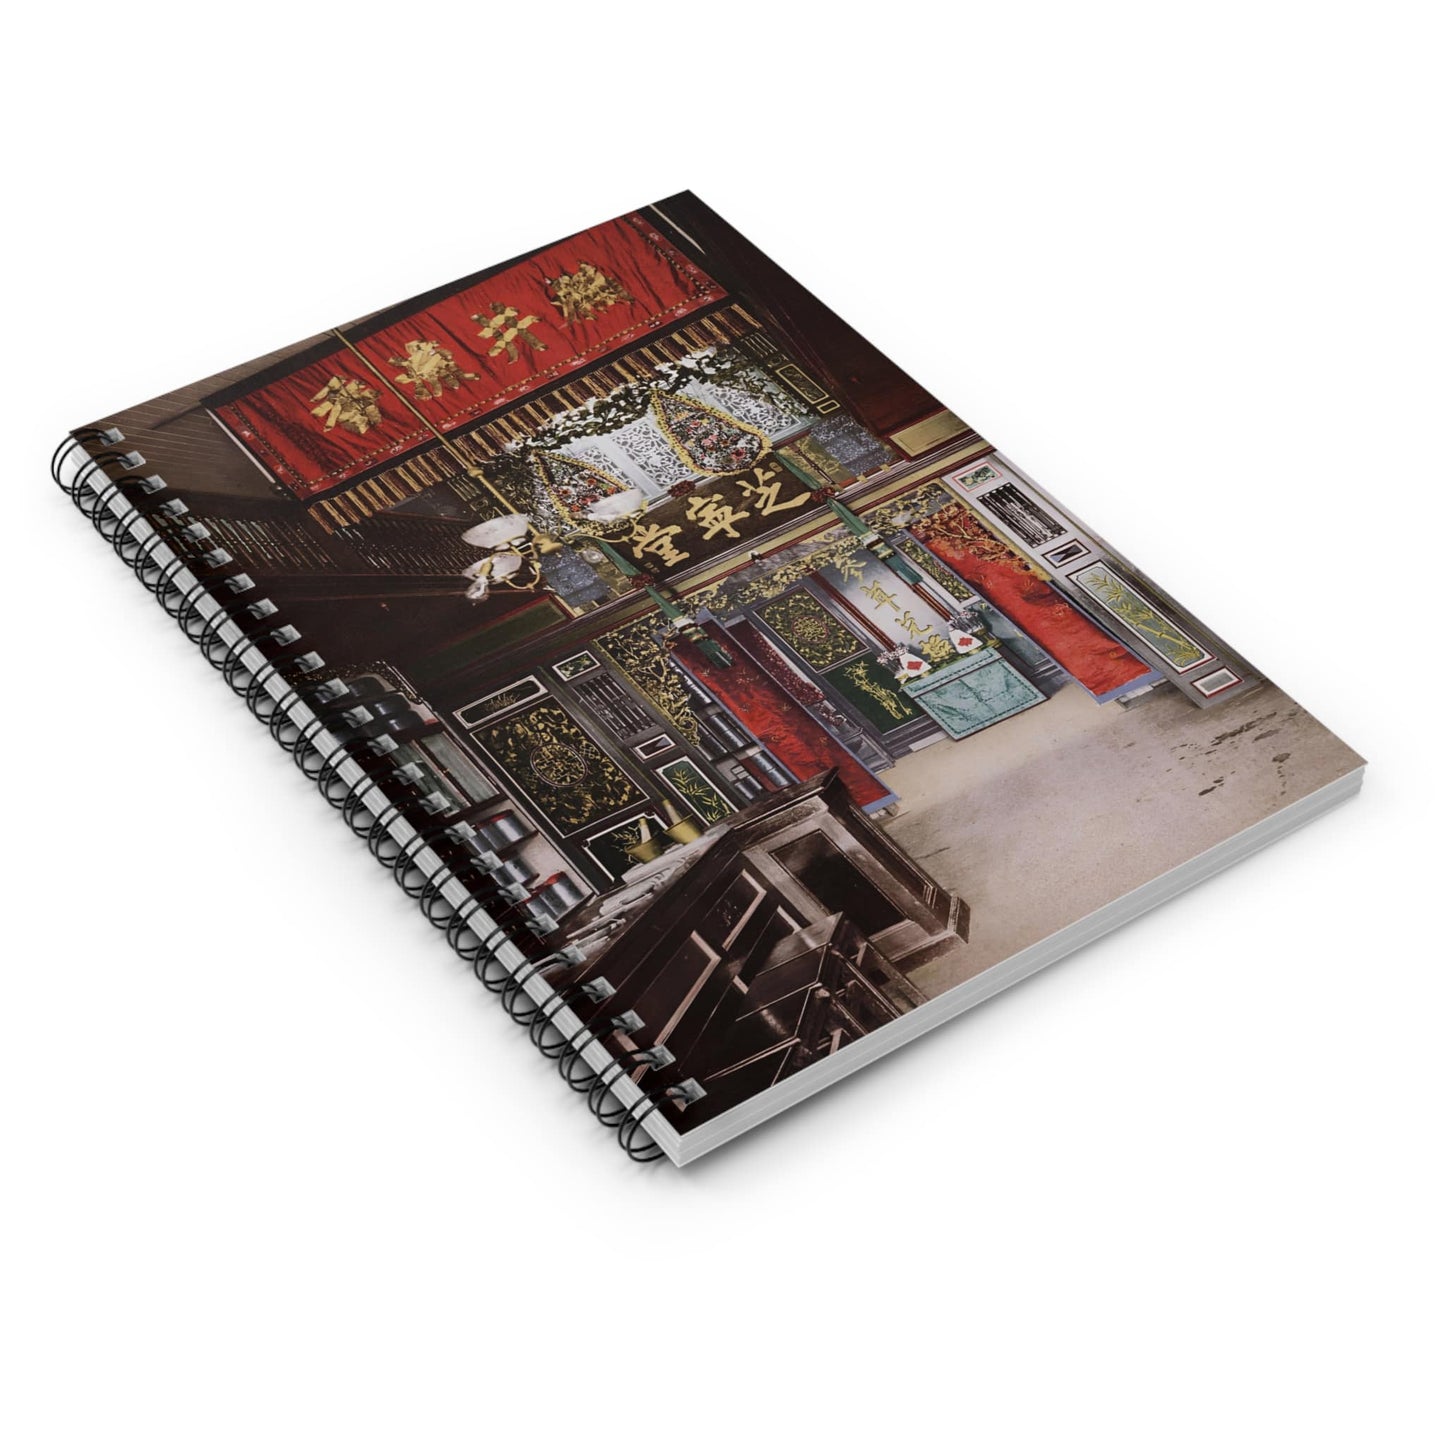 Chinatown Spiral Notebook Laying Flat on White Surface